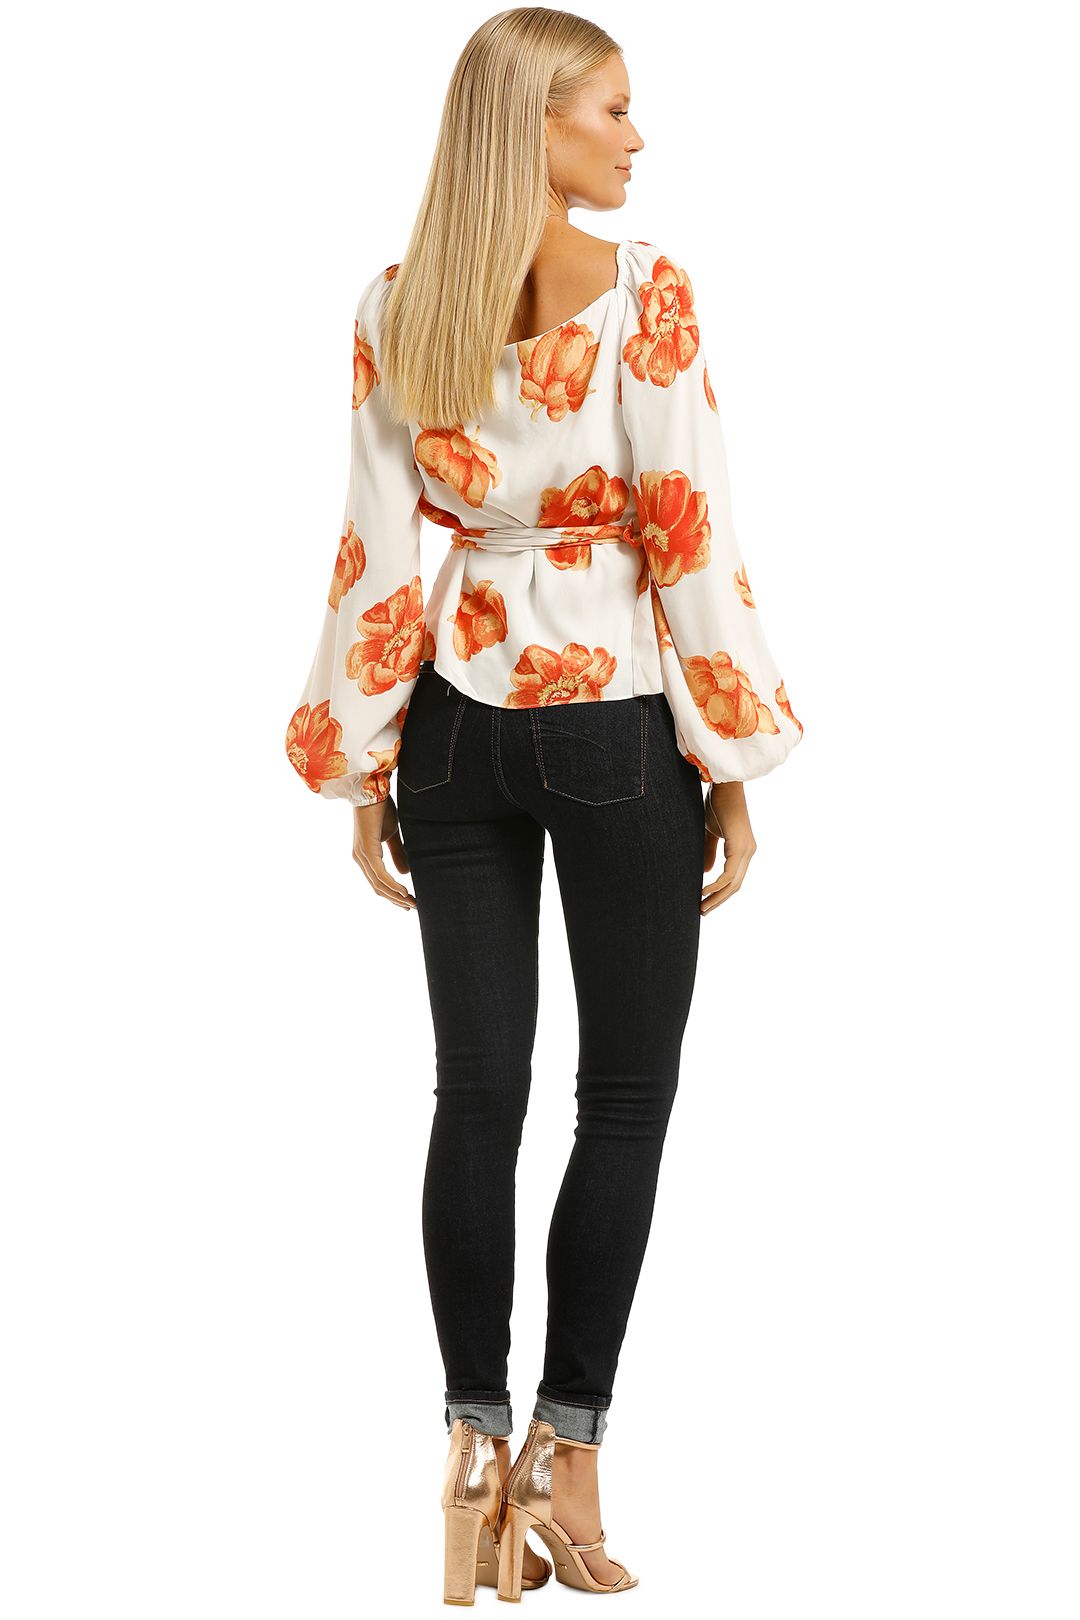 The-East-Order-Frenchie-Top-Fallen-Flowers-Back